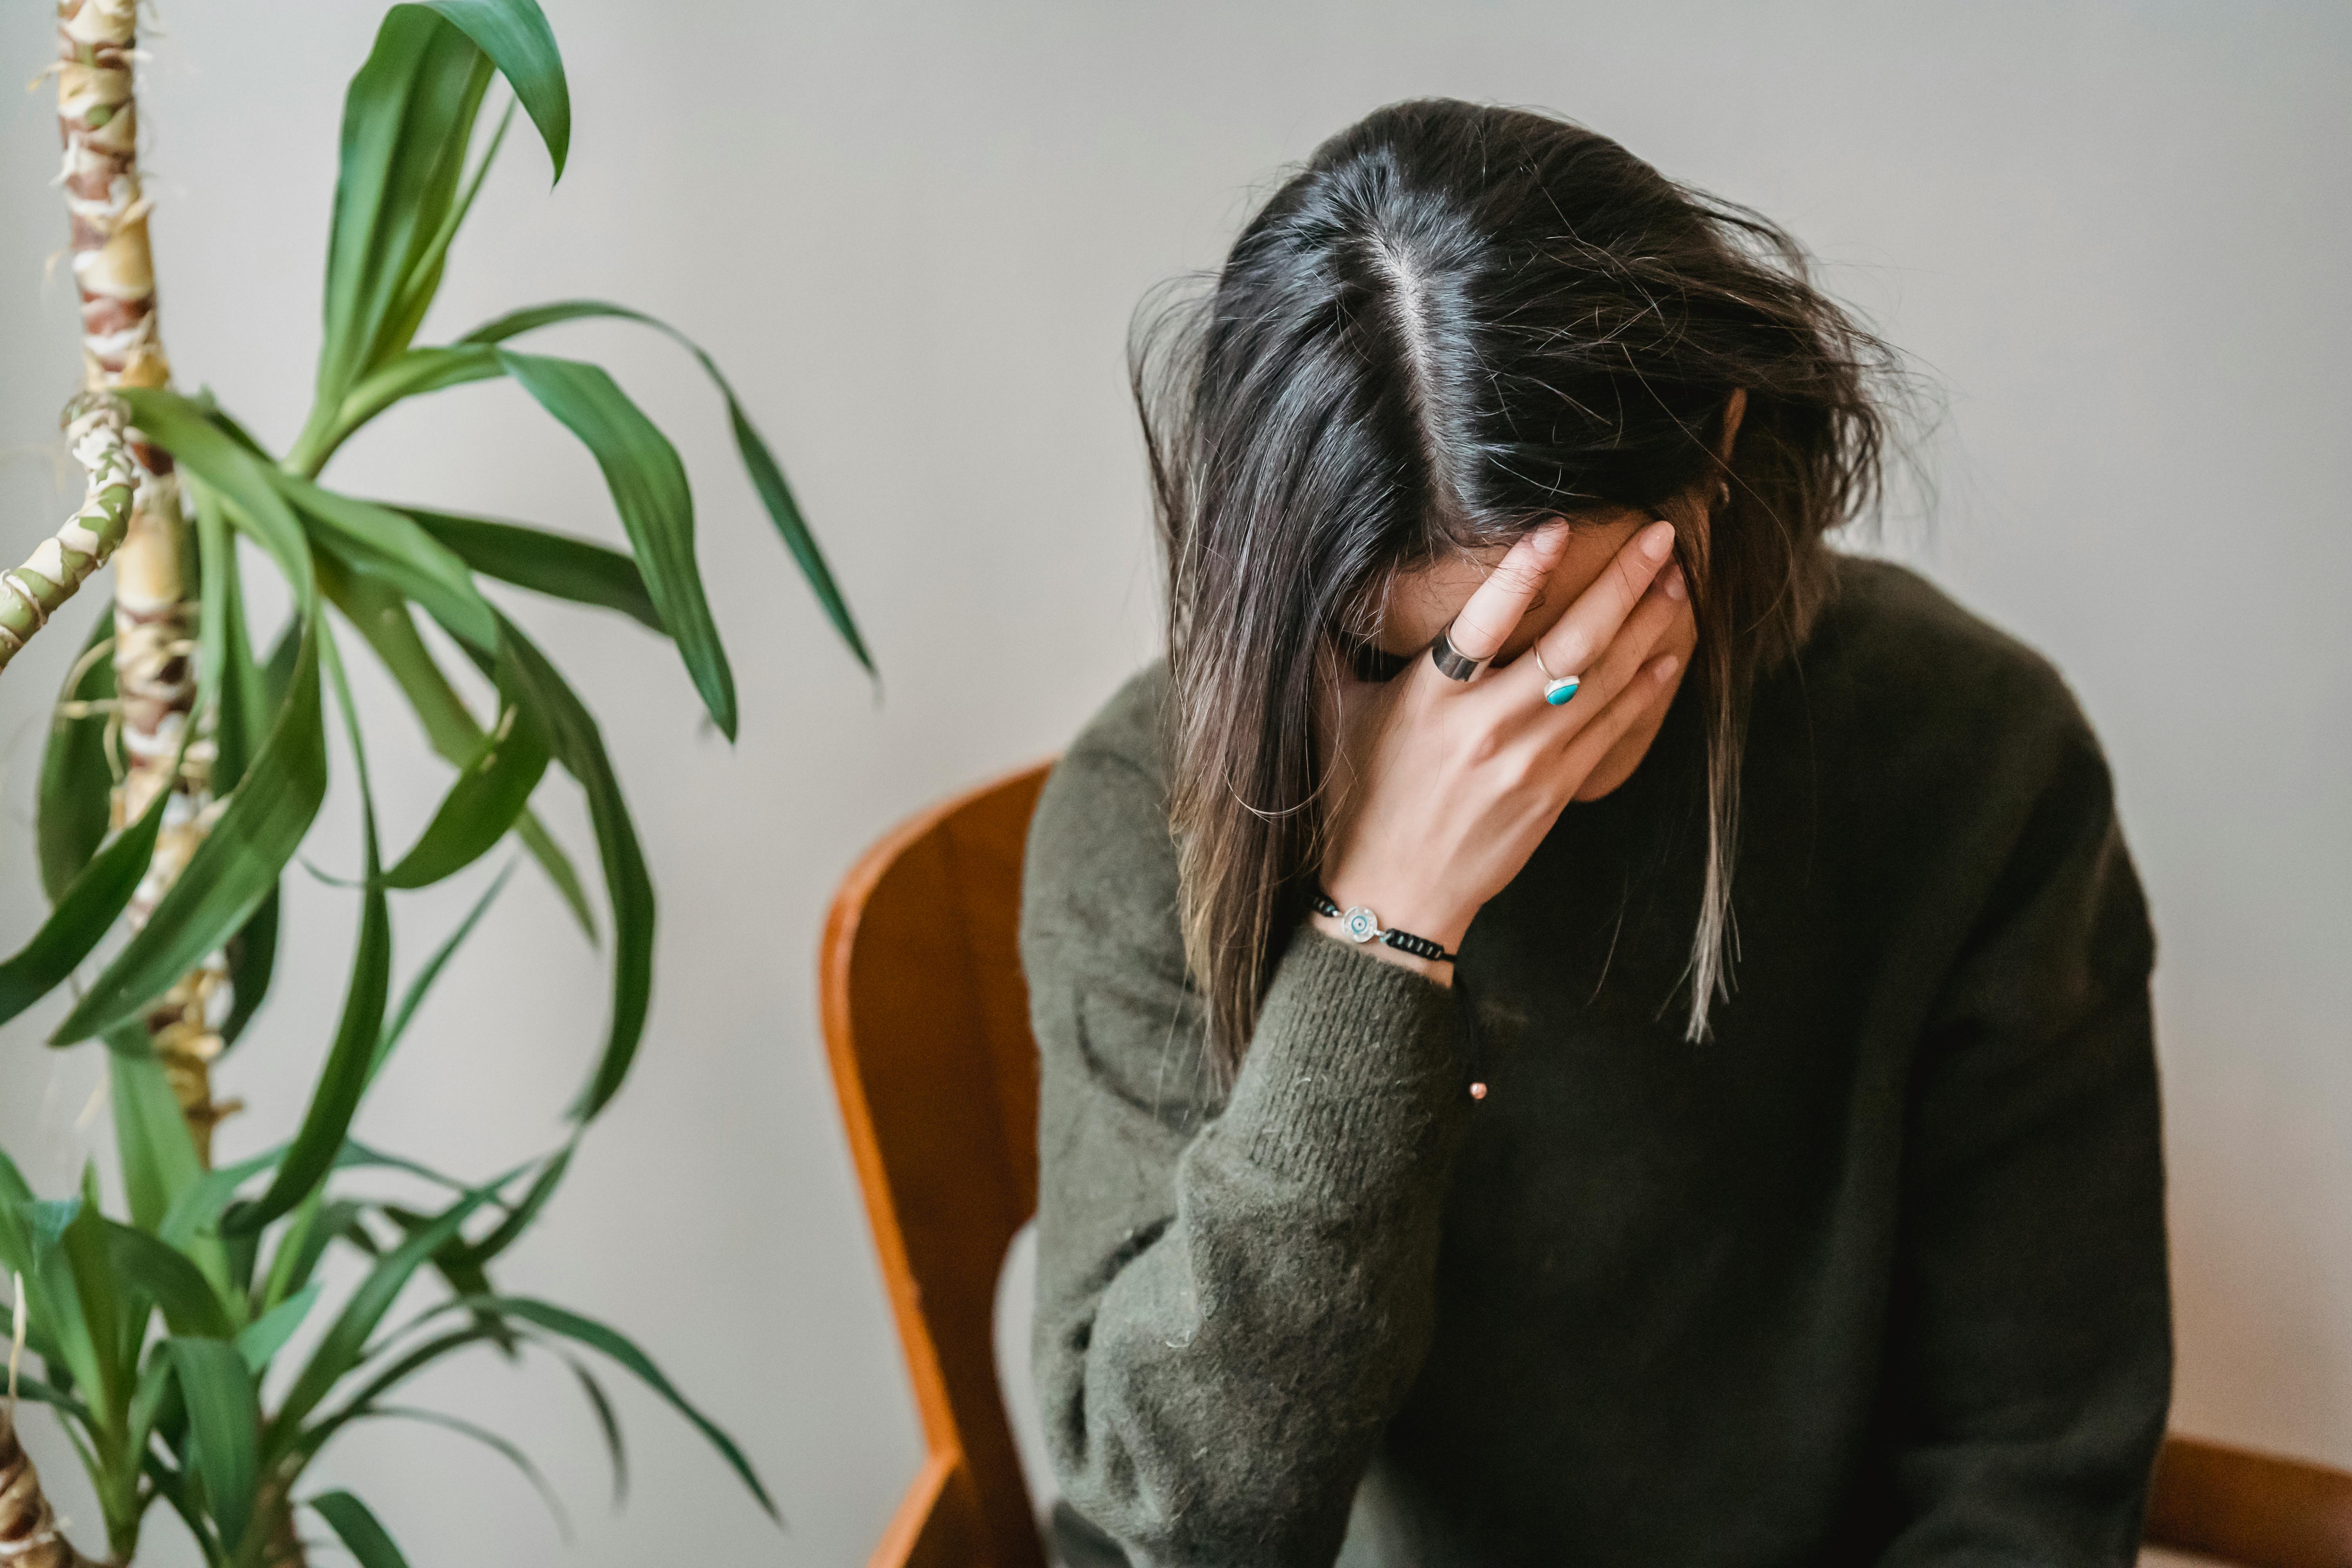 An upset younger woman looking down and covering her face while seated on a chair | Source: Pexels